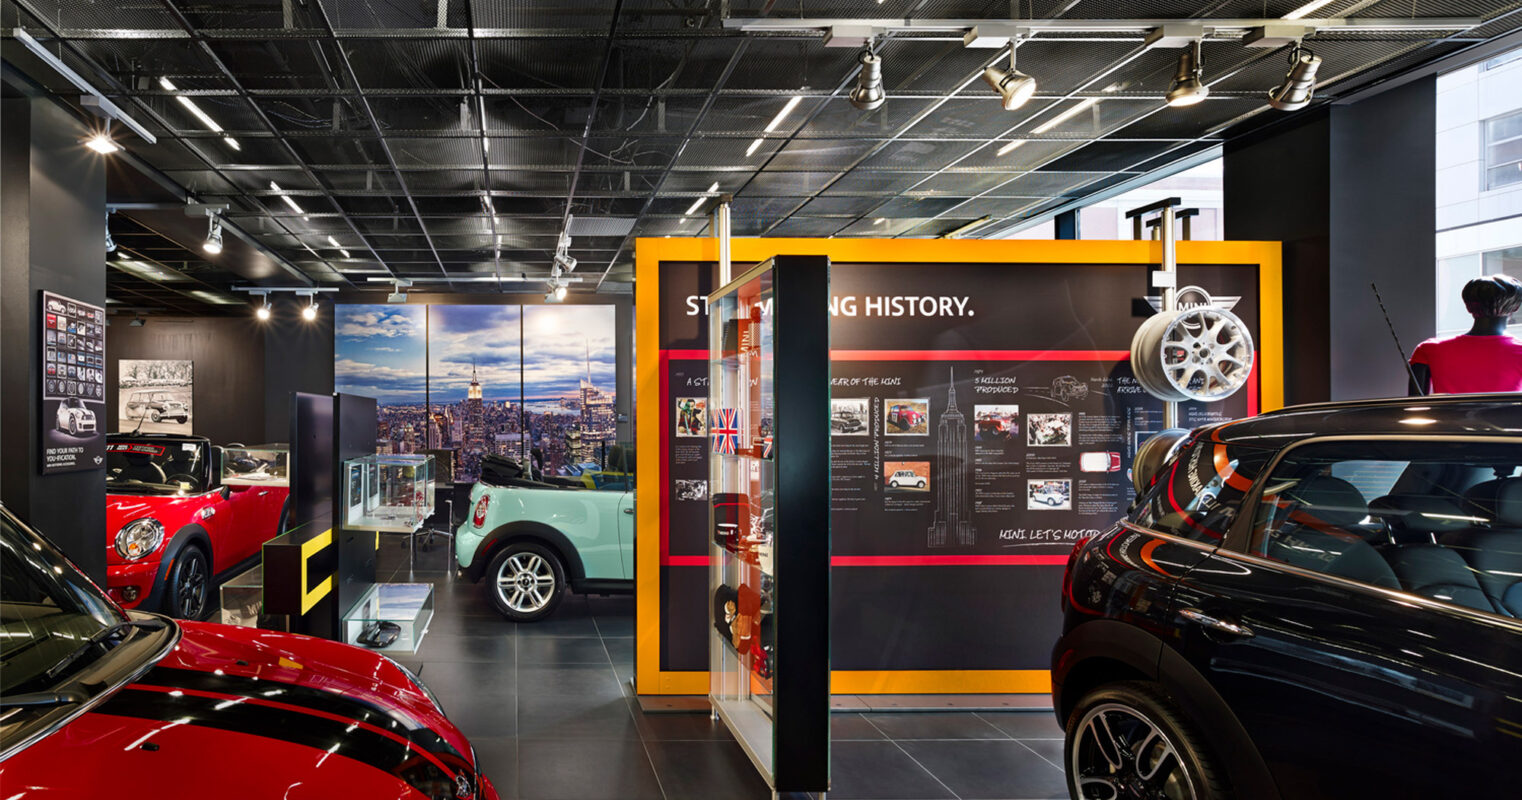 Interior of a car showroom displaying various models, with historical information panels and cityscape imagery.